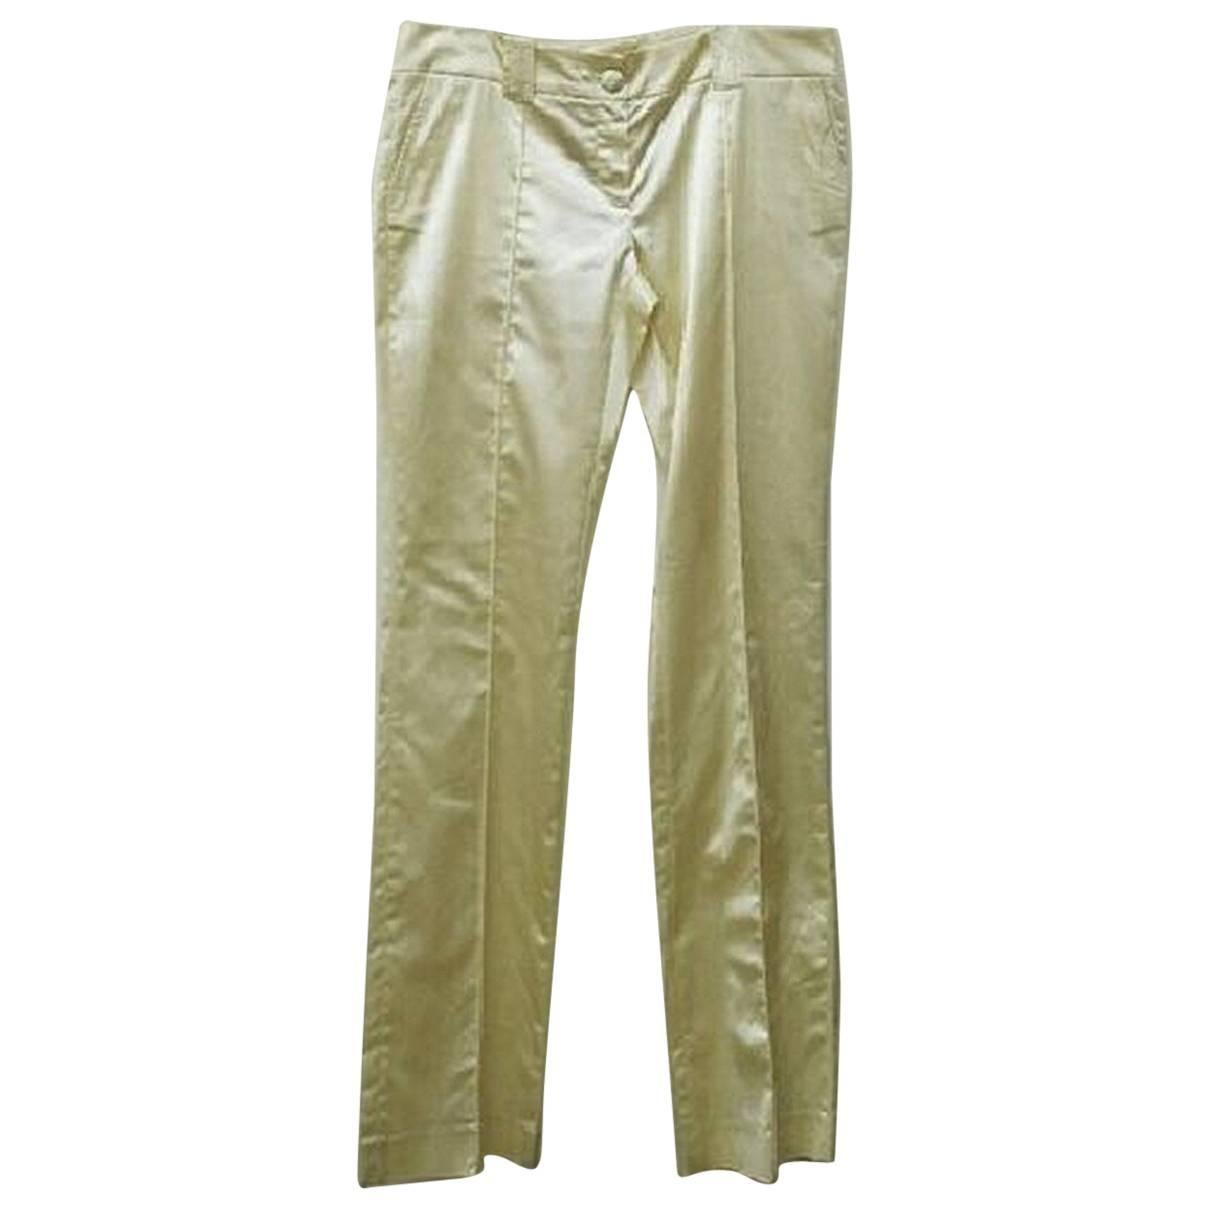 Roberto Cavalli Casual Trousers Pants - Size: 14 (L, 34) For Sale